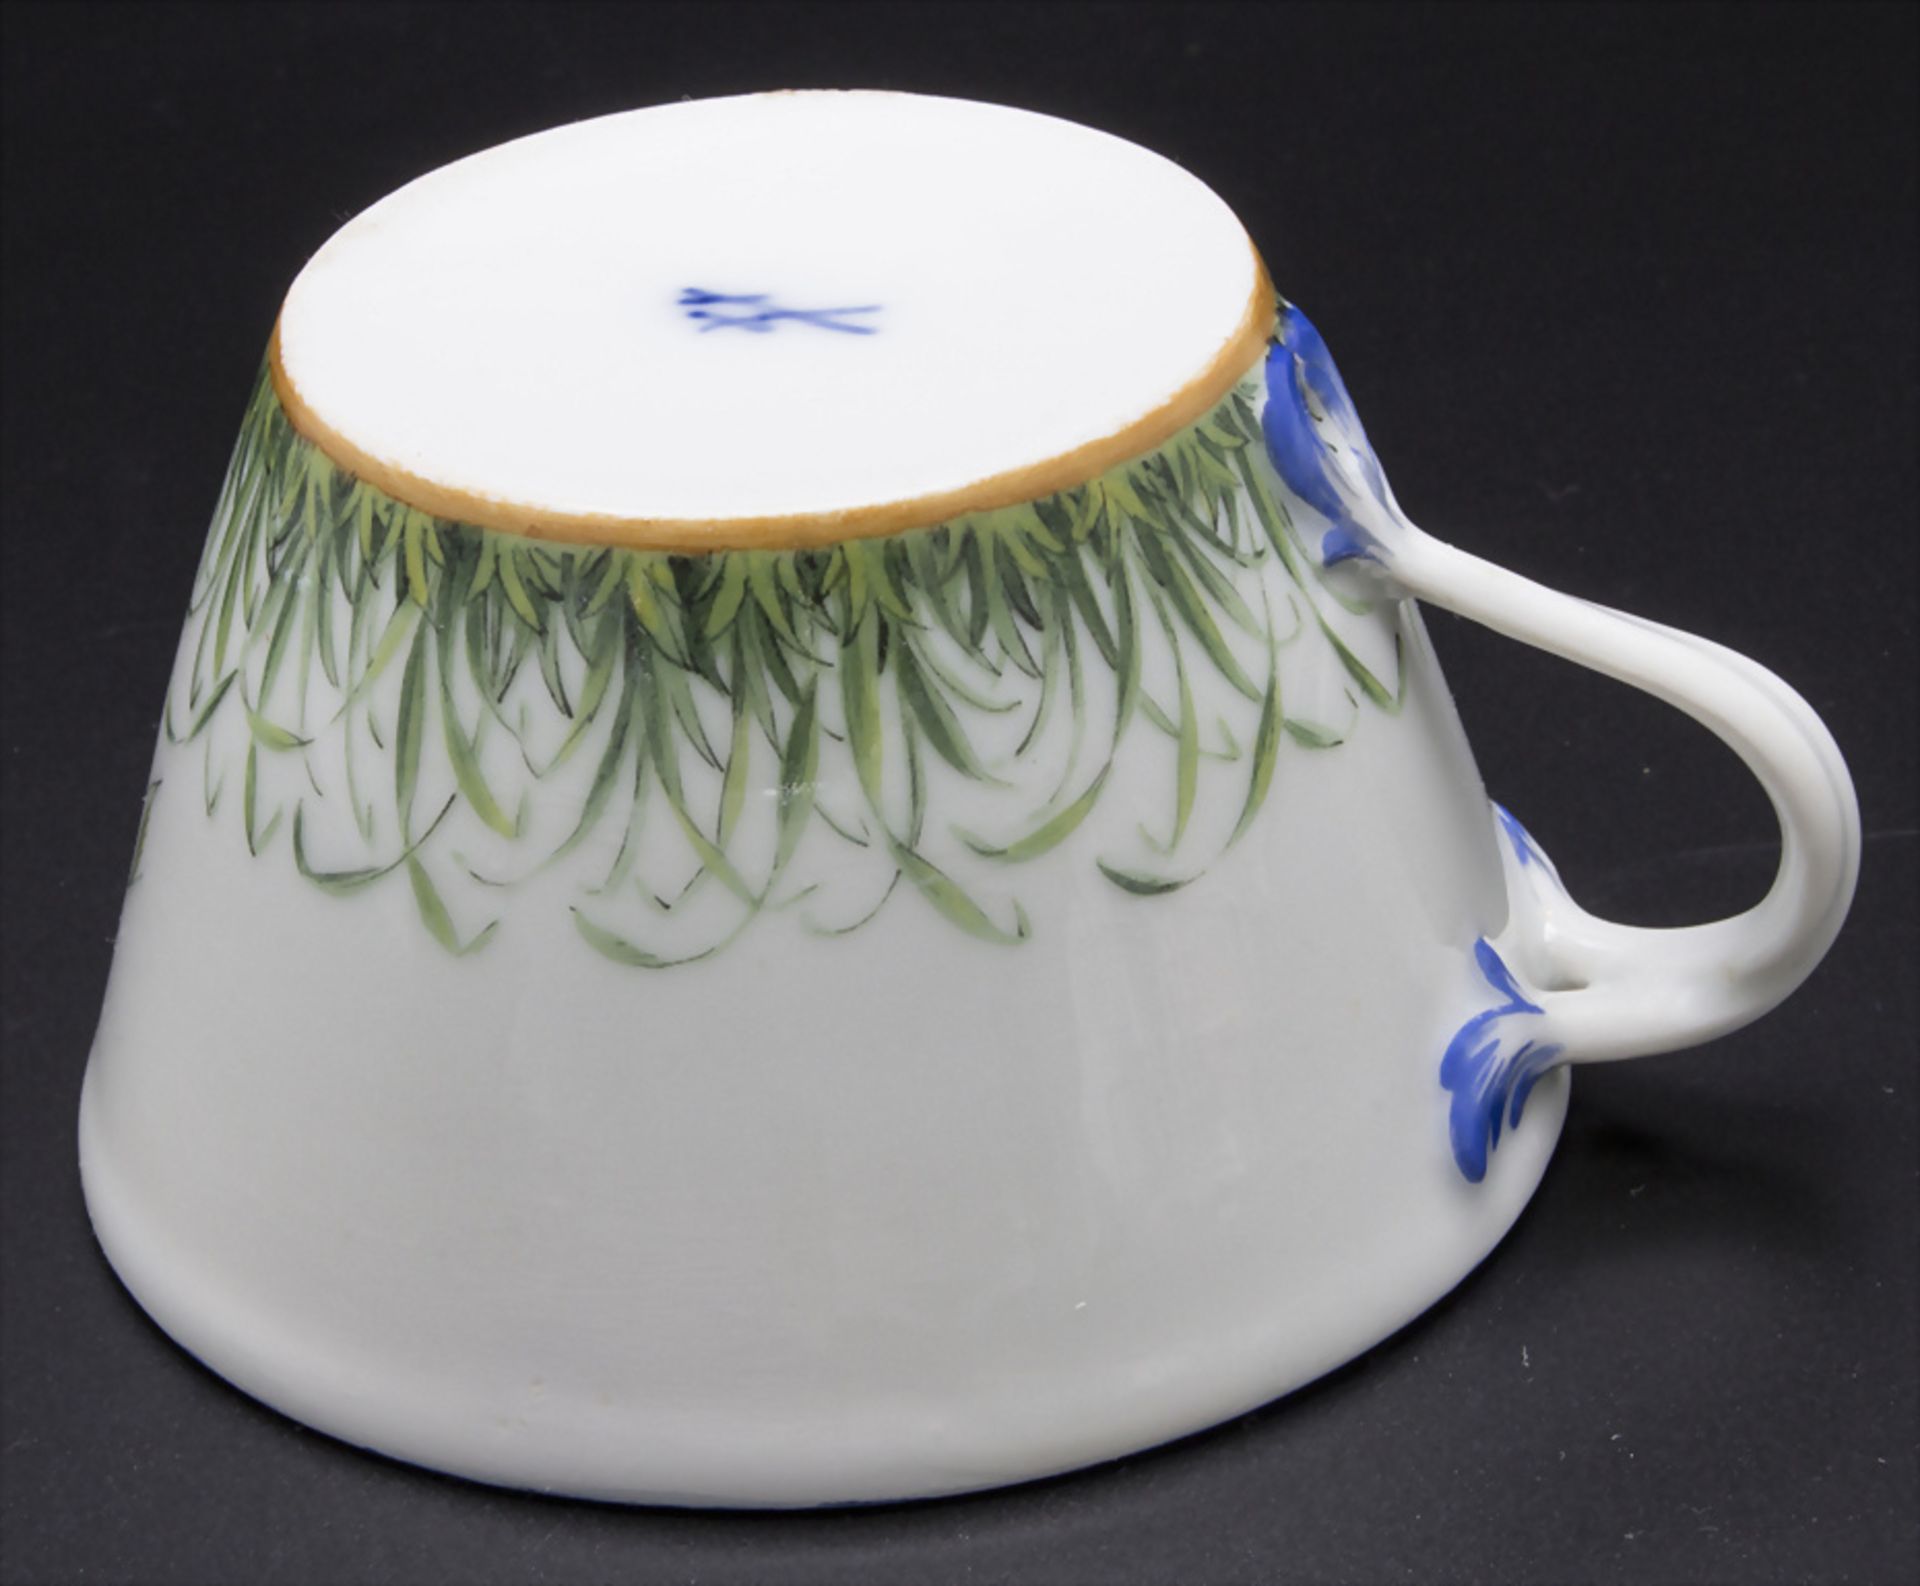 Tasse und UT mit Monogramm / A cup with saucer with monogram, Meissen, Anfang 19. Jh. - Image 7 of 9